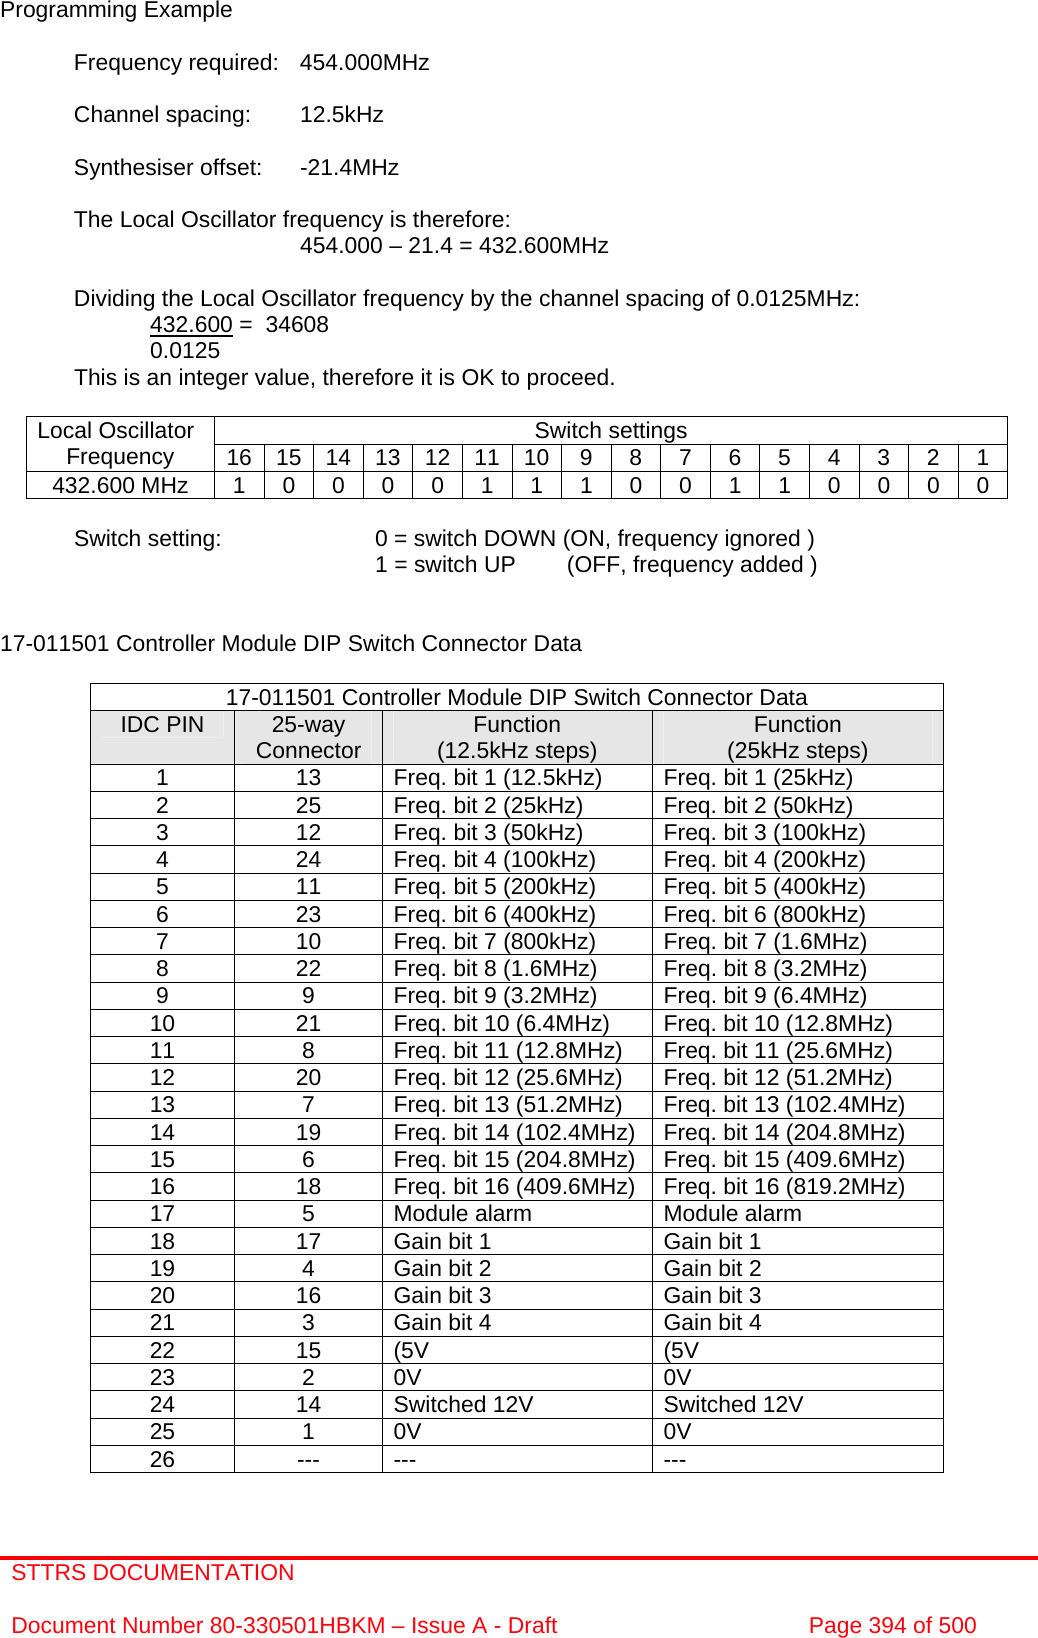 STTRS DOCUMENTATION  Document Number 80-330501HBKM – Issue A - Draft  Page 394 of 500   Programming Example  Frequency required:  454.000MHz  Channel spacing:  12.5kHz  Synthesiser offset:  -21.4MHz  The Local Oscillator frequency is therefore:         454.000 – 21.4 = 432.600MHz  Dividing the Local Oscillator frequency by the channel spacing of 0.0125MHz:    432.600 =  34608     0.0125 This is an integer value, therefore it is OK to proceed.  Switch settings Local Oscillator Frequency  16 15 14 13 12 11 10 9 8 7 6 5 4 3 2 1 432.600 MHz  1 0 0 0 0 1 1 1 0 0 1 1 0 0 0 0  Switch setting:     0 = switch DOWN (ON, frequency ignored )          1 = switch UP        (OFF, frequency added )   17-011501 Controller Module DIP Switch Connector Data  17-011501 Controller Module DIP Switch Connector Data IDC PIN  25-way Connector  Function (12.5kHz steps)  Function (25kHz steps) 1  13  Freq. bit 1 (12.5kHz)  Freq. bit 1 (25kHz) 2  25  Freq. bit 2 (25kHz)  Freq. bit 2 (50kHz) 3  12  Freq. bit 3 (50kHz)  Freq. bit 3 (100kHz) 4  24  Freq. bit 4 (100kHz)  Freq. bit 4 (200kHz) 5  11  Freq. bit 5 (200kHz)  Freq. bit 5 (400kHz) 6  23  Freq. bit 6 (400kHz)  Freq. bit 6 (800kHz) 7  10  Freq. bit 7 (800kHz)  Freq. bit 7 (1.6MHz) 8  22  Freq. bit 8 (1.6MHz)  Freq. bit 8 (3.2MHz) 9  9  Freq. bit 9 (3.2MHz)  Freq. bit 9 (6.4MHz) 10  21  Freq. bit 10 (6.4MHz)  Freq. bit 10 (12.8MHz) 11  8  Freq. bit 11 (12.8MHz)  Freq. bit 11 (25.6MHz) 12  20  Freq. bit 12 (25.6MHz)  Freq. bit 12 (51.2MHz) 13  7  Freq. bit 13 (51.2MHz)  Freq. bit 13 (102.4MHz) 14  19  Freq. bit 14 (102.4MHz)  Freq. bit 14 (204.8MHz) 15  6  Freq. bit 15 (204.8MHz)  Freq. bit 15 (409.6MHz) 16  18  Freq. bit 16 (409.6MHz)  Freq. bit 16 (819.2MHz) 17  5  Module alarm  Module alarm 18  17  Gain bit 1  Gain bit 1 19  4  Gain bit 2  Gain bit 2 20  16  Gain bit 3  Gain bit 3 21  3  Gain bit 4  Gain bit 4 22 15 (5V  (5V 23 2 0V  0V 24  14  Switched 12V  Switched 12V 25 1 0V  0V 26 --- ---  ---  